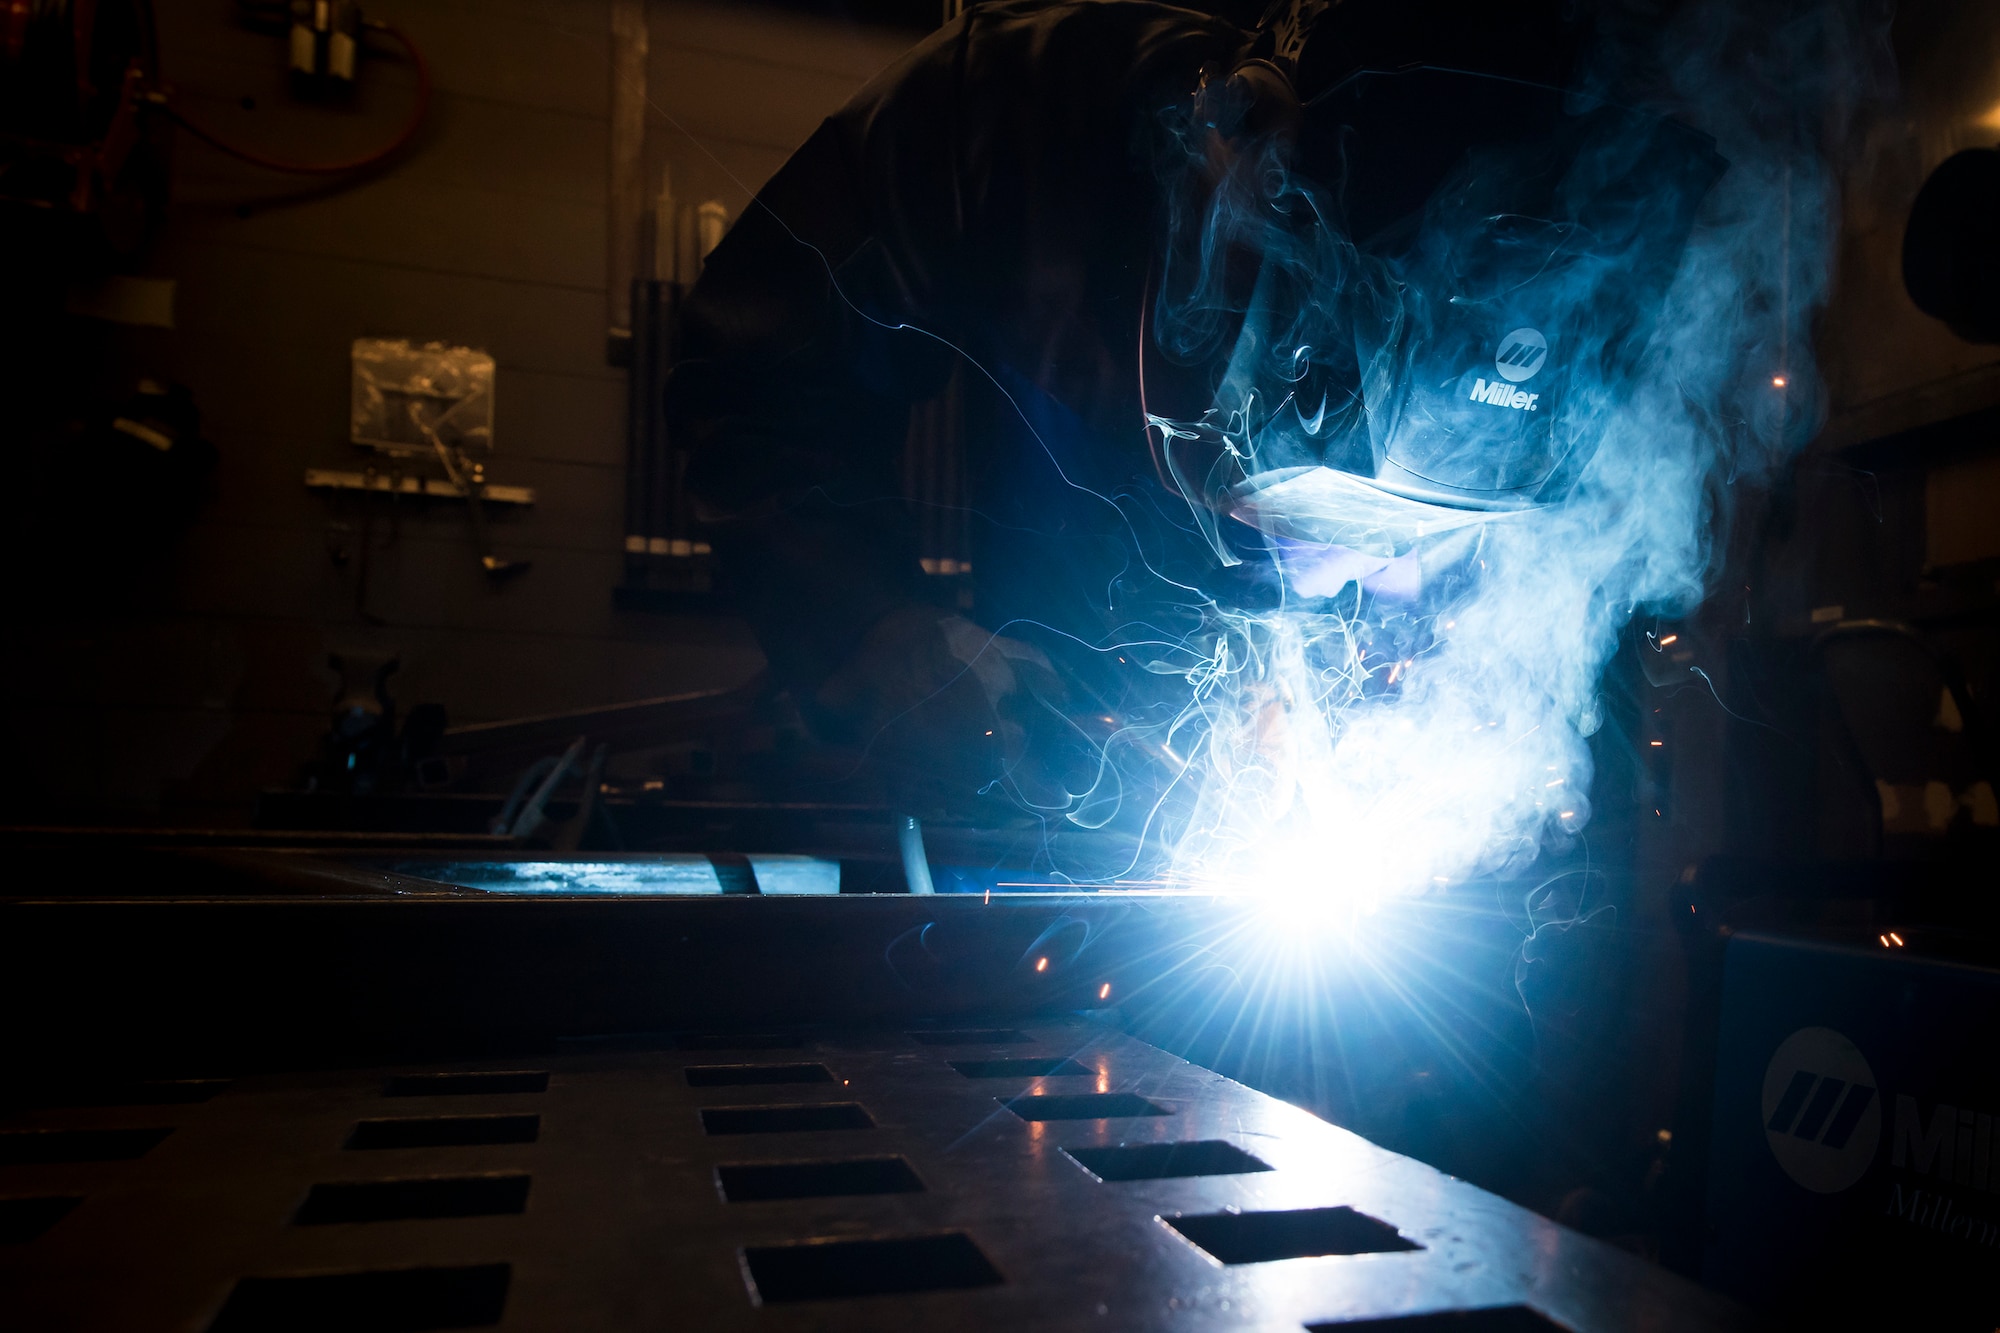 Airman 1st Class Isaiah Jackson, 23d Maintenance Squadron aircraft metals technology journeyman, components of a table, April 25, 2018, at Moody Air Force Base, Ga. Metals technicians support the mission by utilizing fabrication techniques to repair and overhaul countless tools and aircraft parts. The technicians strive to exercise safe and precise fabrication techniques to be able to sufficiently handle their intense workload. (U.S. Air Force photo by Airman 1st Class Eugene Oliver)